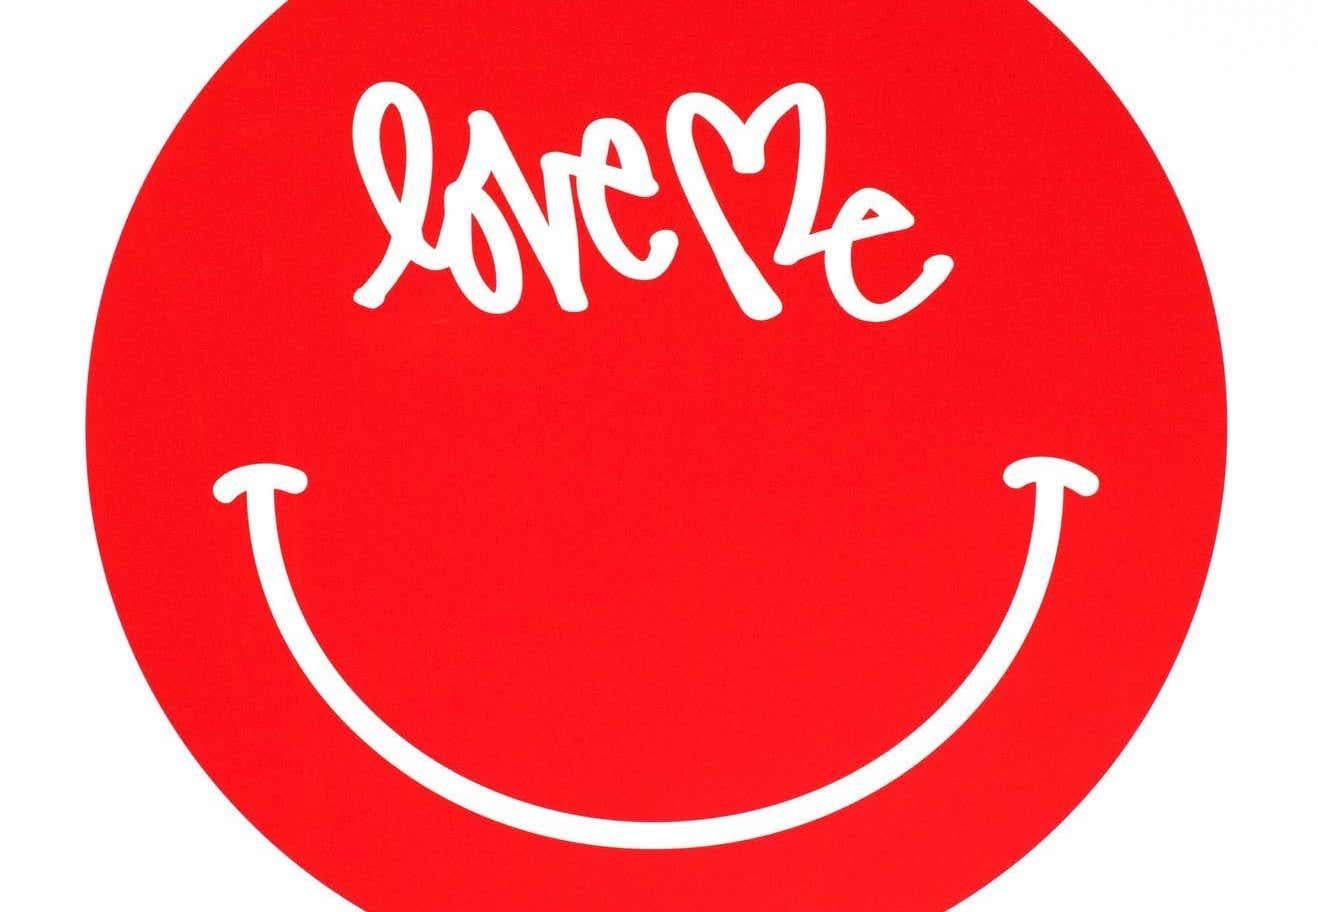 Curtis Kulig Love Me screen print (Love Me by Curtis Kulig) For Sale 3